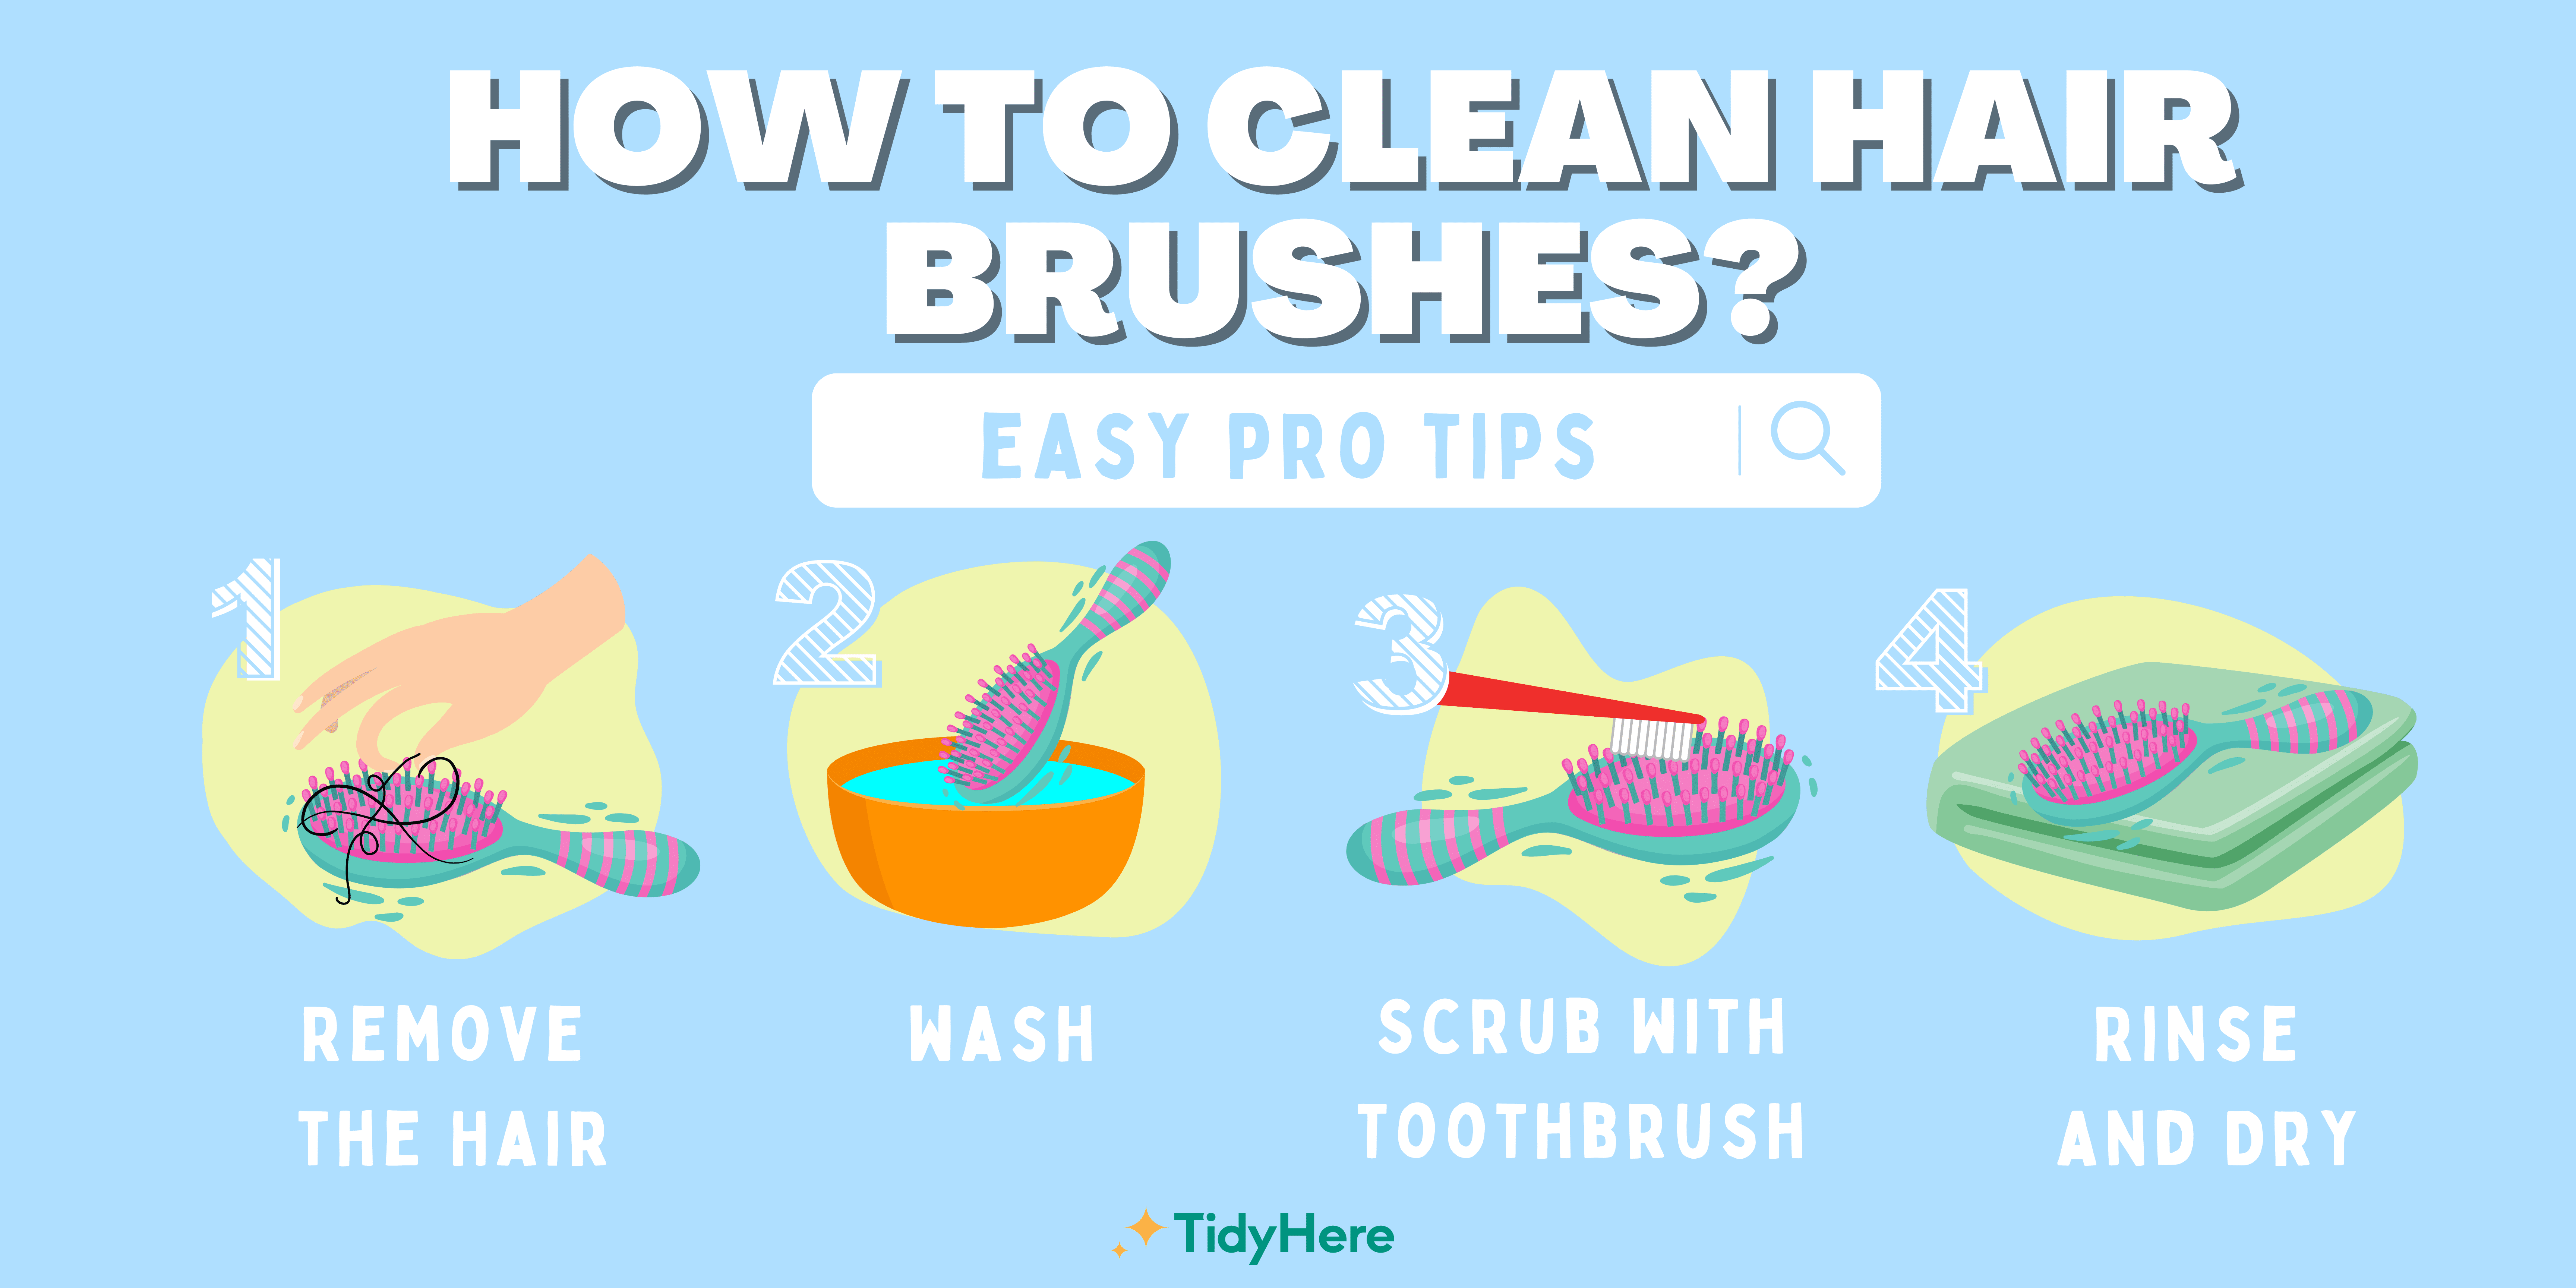 how to clean hair brushes easy pro tips infographic